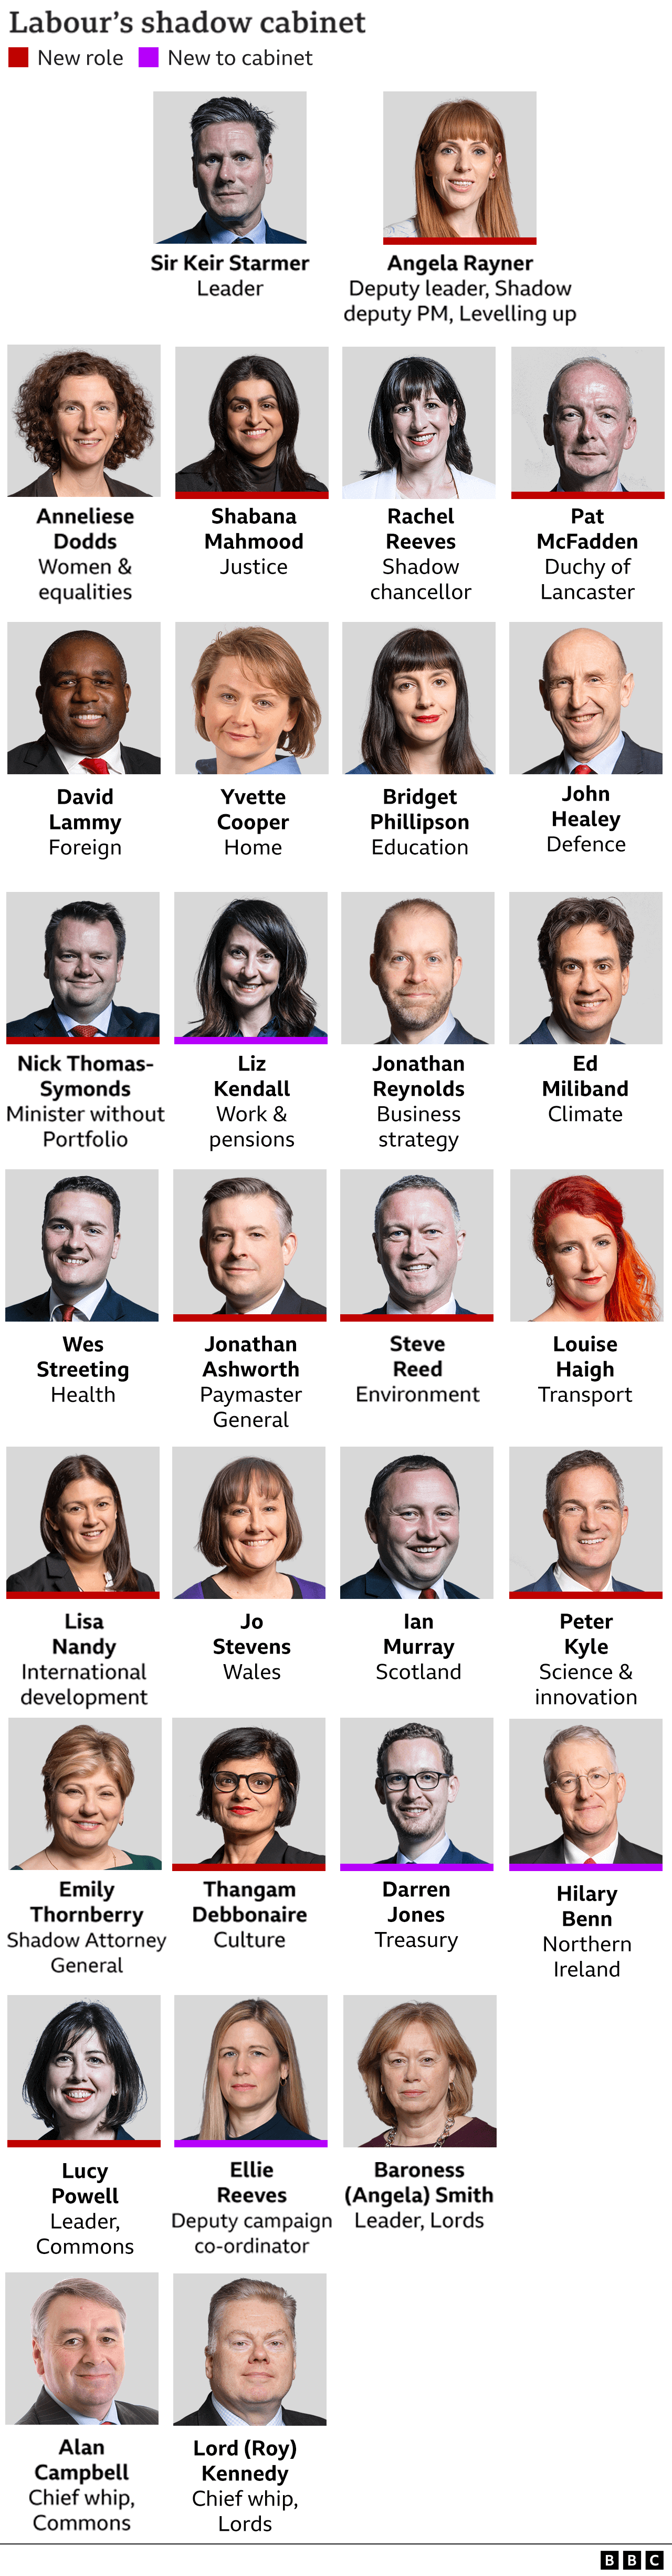 Labour shadow cabinet